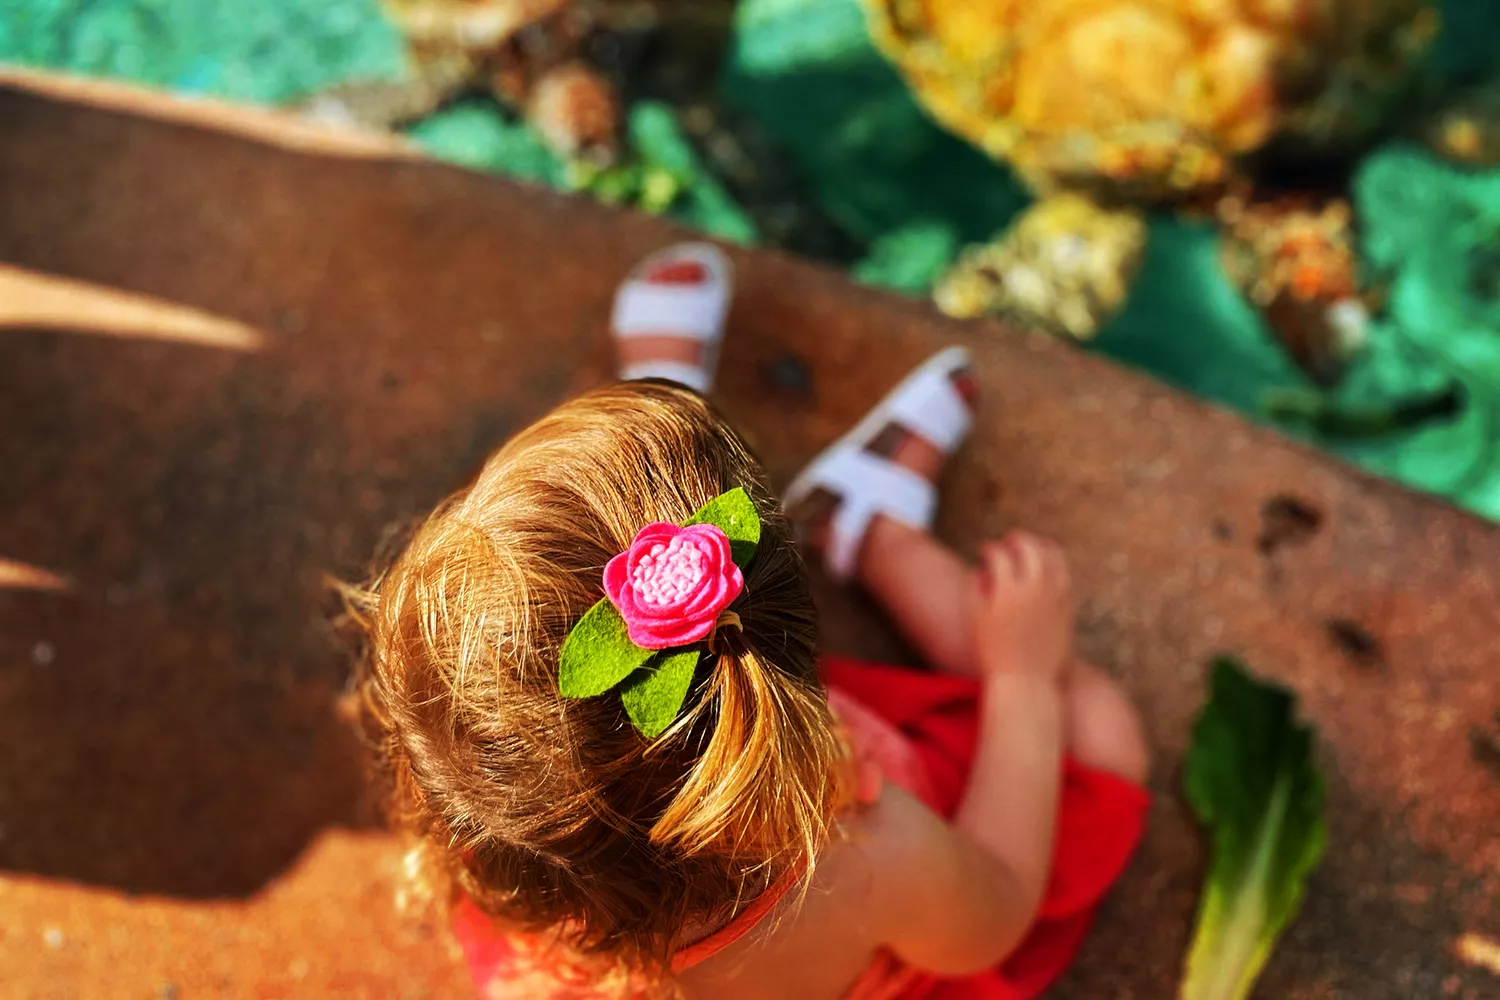 My daughter fell in love with the ocean after I took her to a coral nursery in the Bahamas.